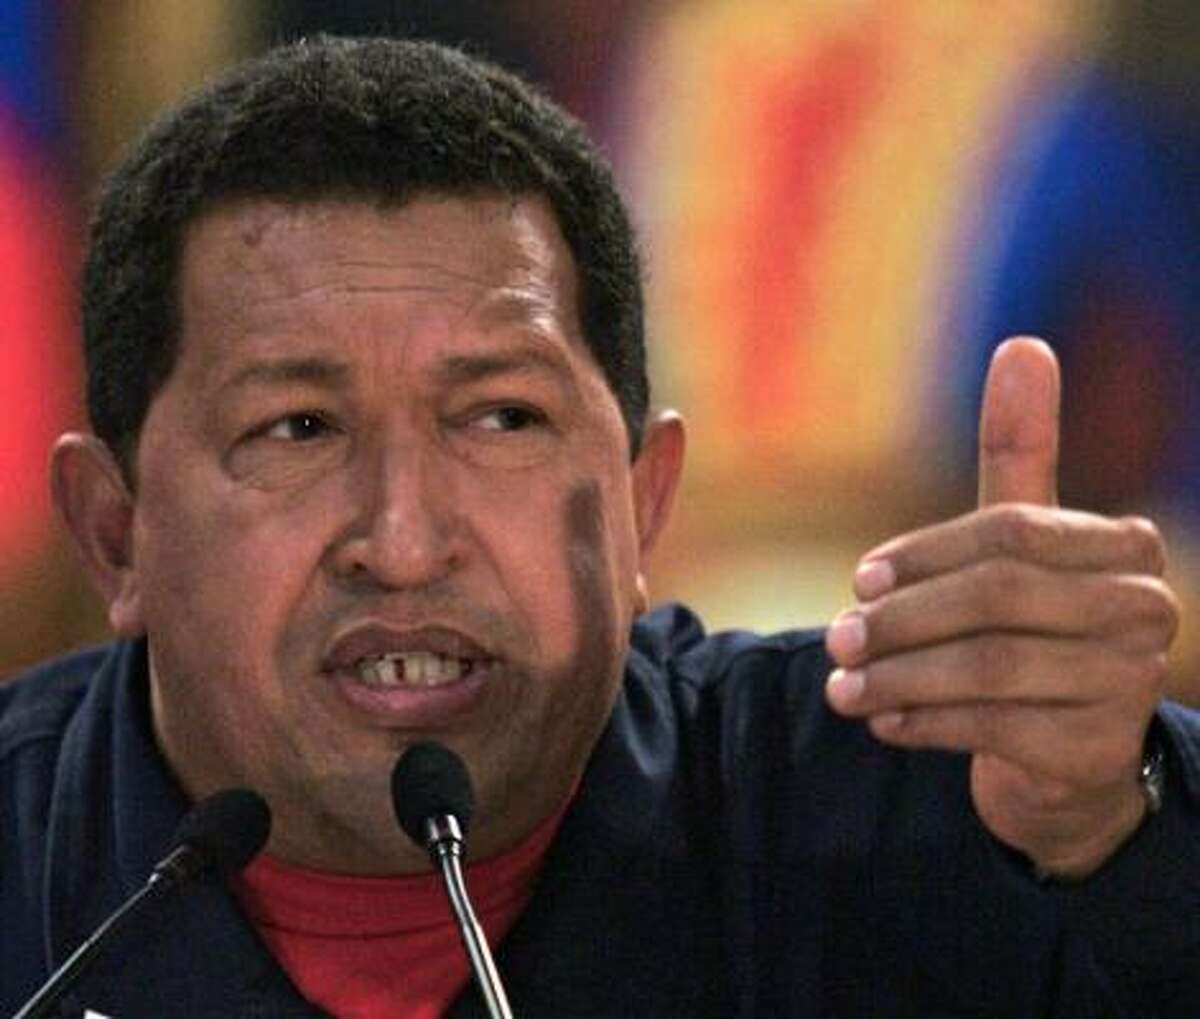 Hugo Chavez contends Washington is trying to stir up violence against his regime.